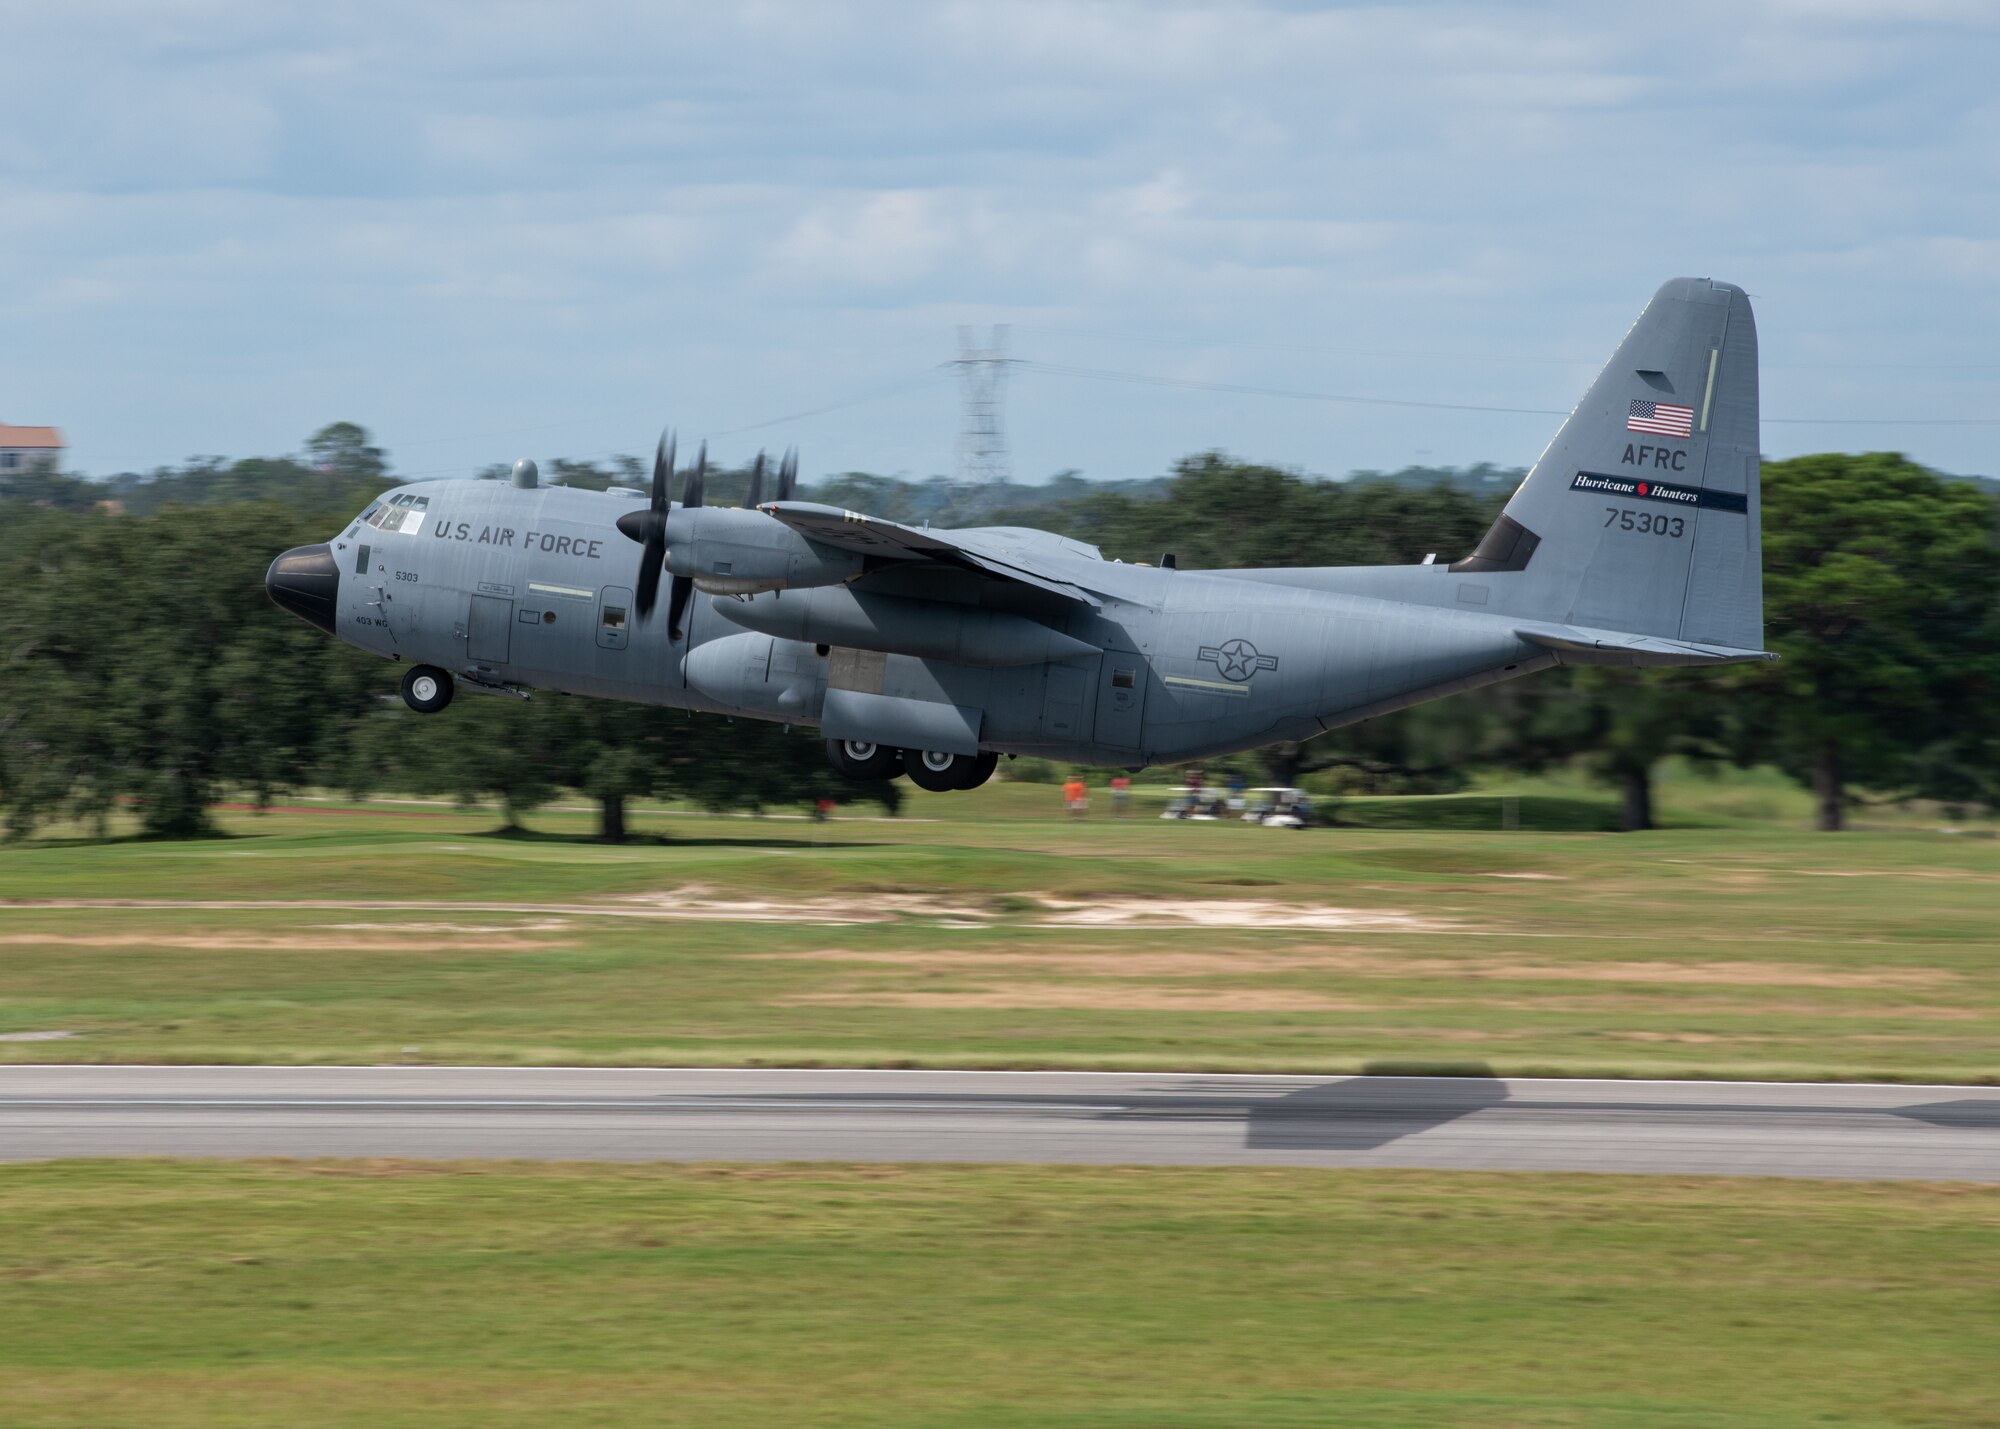 WC-130J aircraft takes takes off.